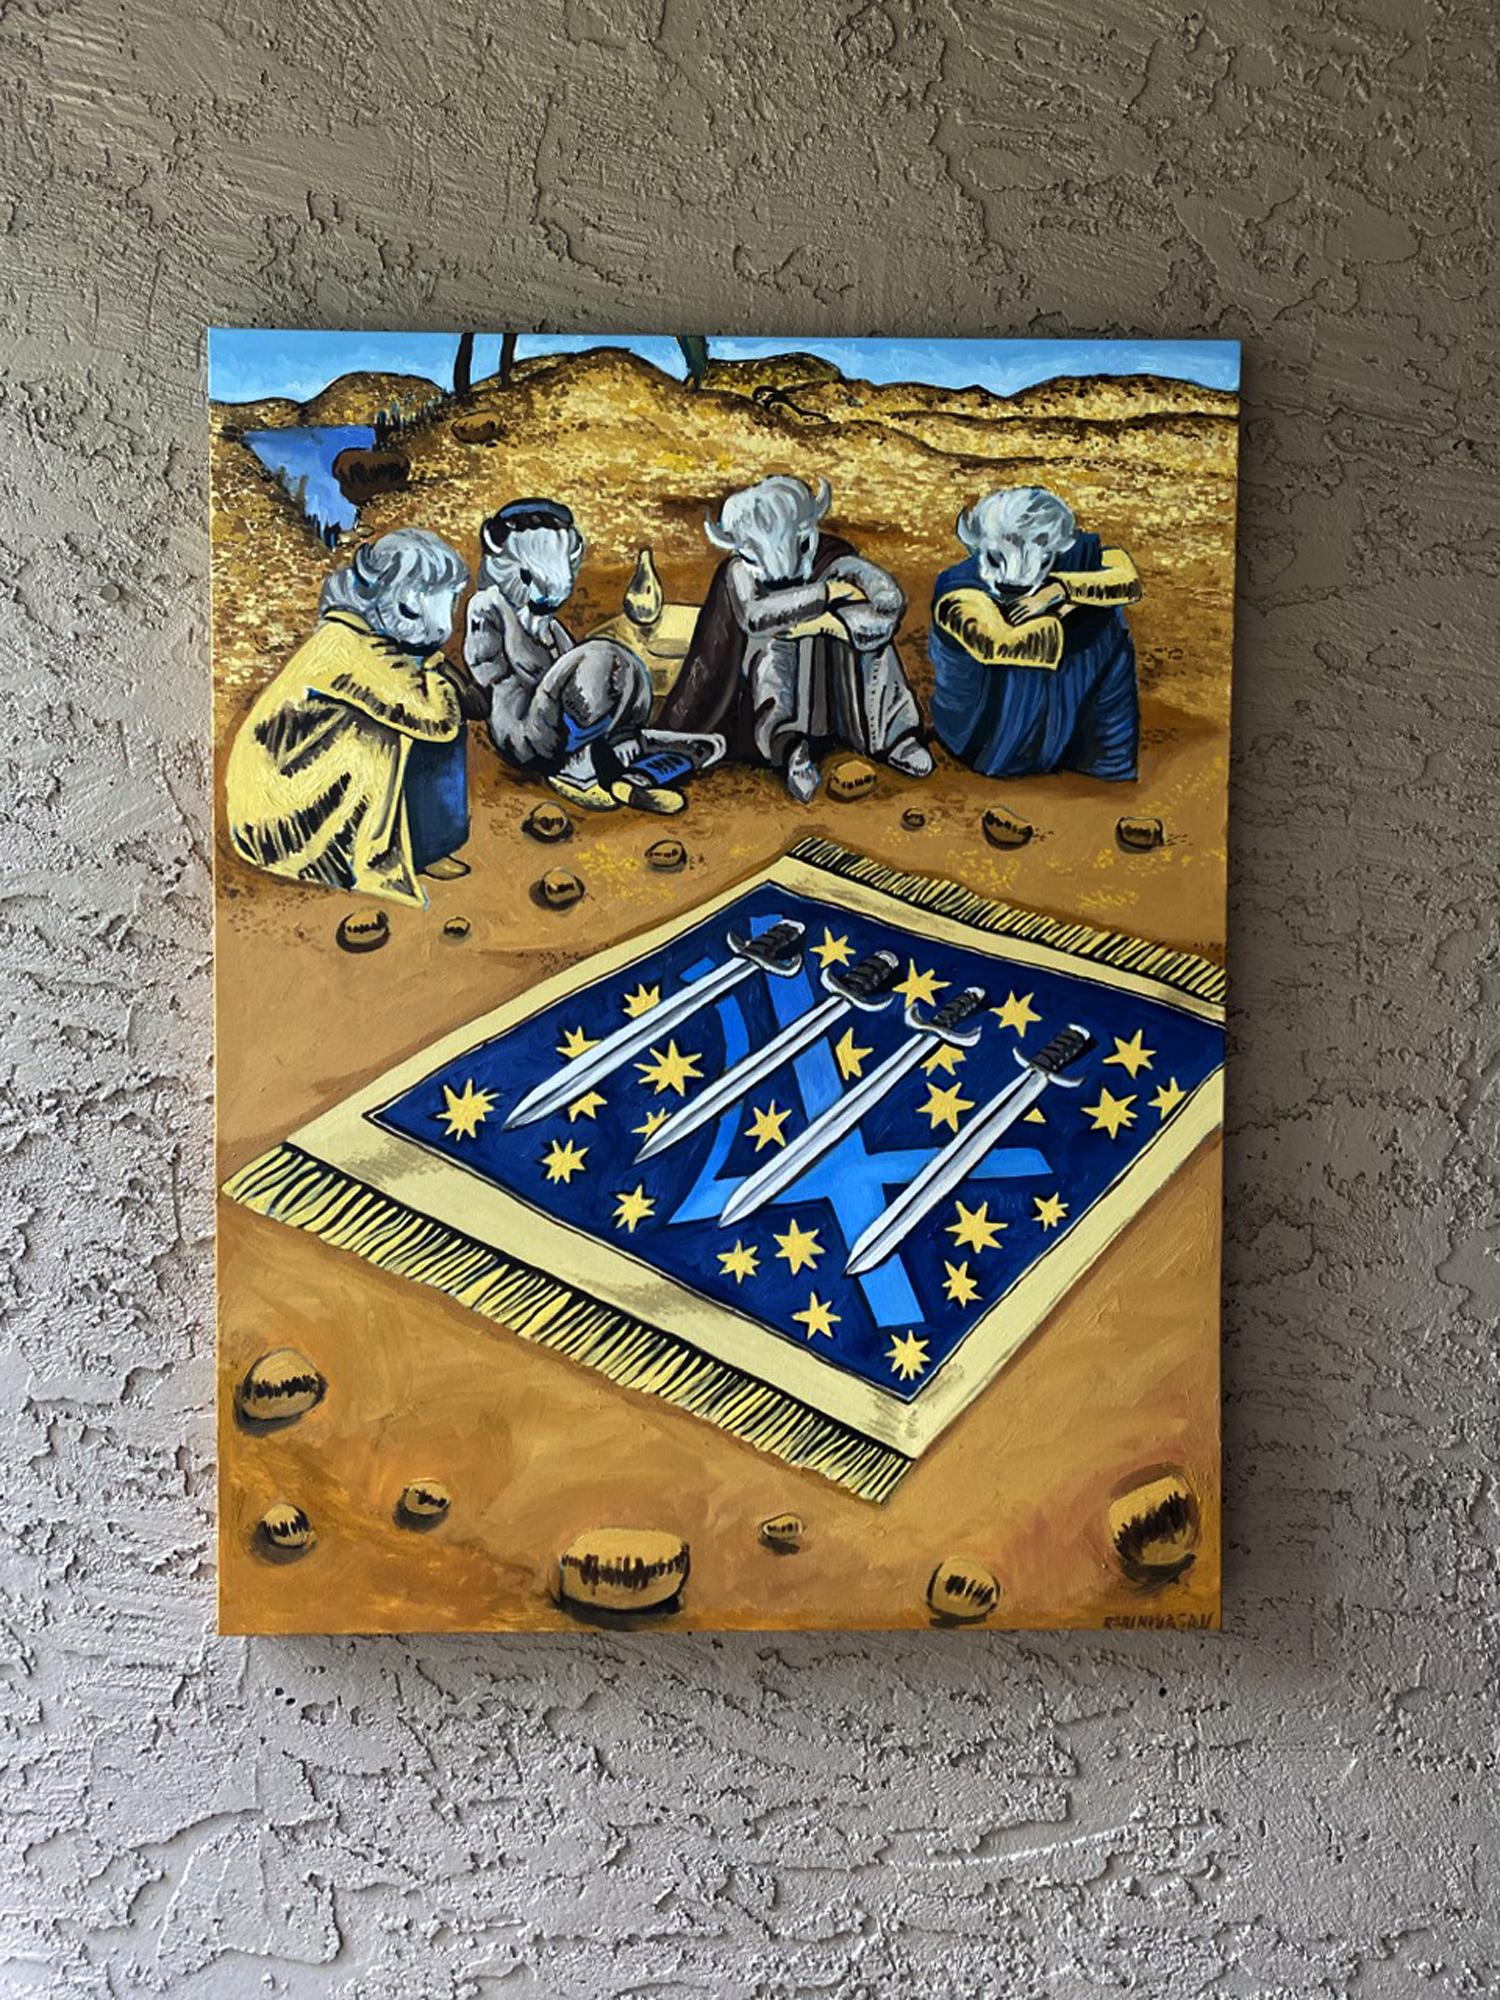 <p>Artist Comments<br />Part of artist Rachel Srinivasan's Tarot series. In this piece, she paints an interpretation of the card Four of Swords, showing four humanoid figures with buffalo heads taking a moment to pause and sit after a long journey.